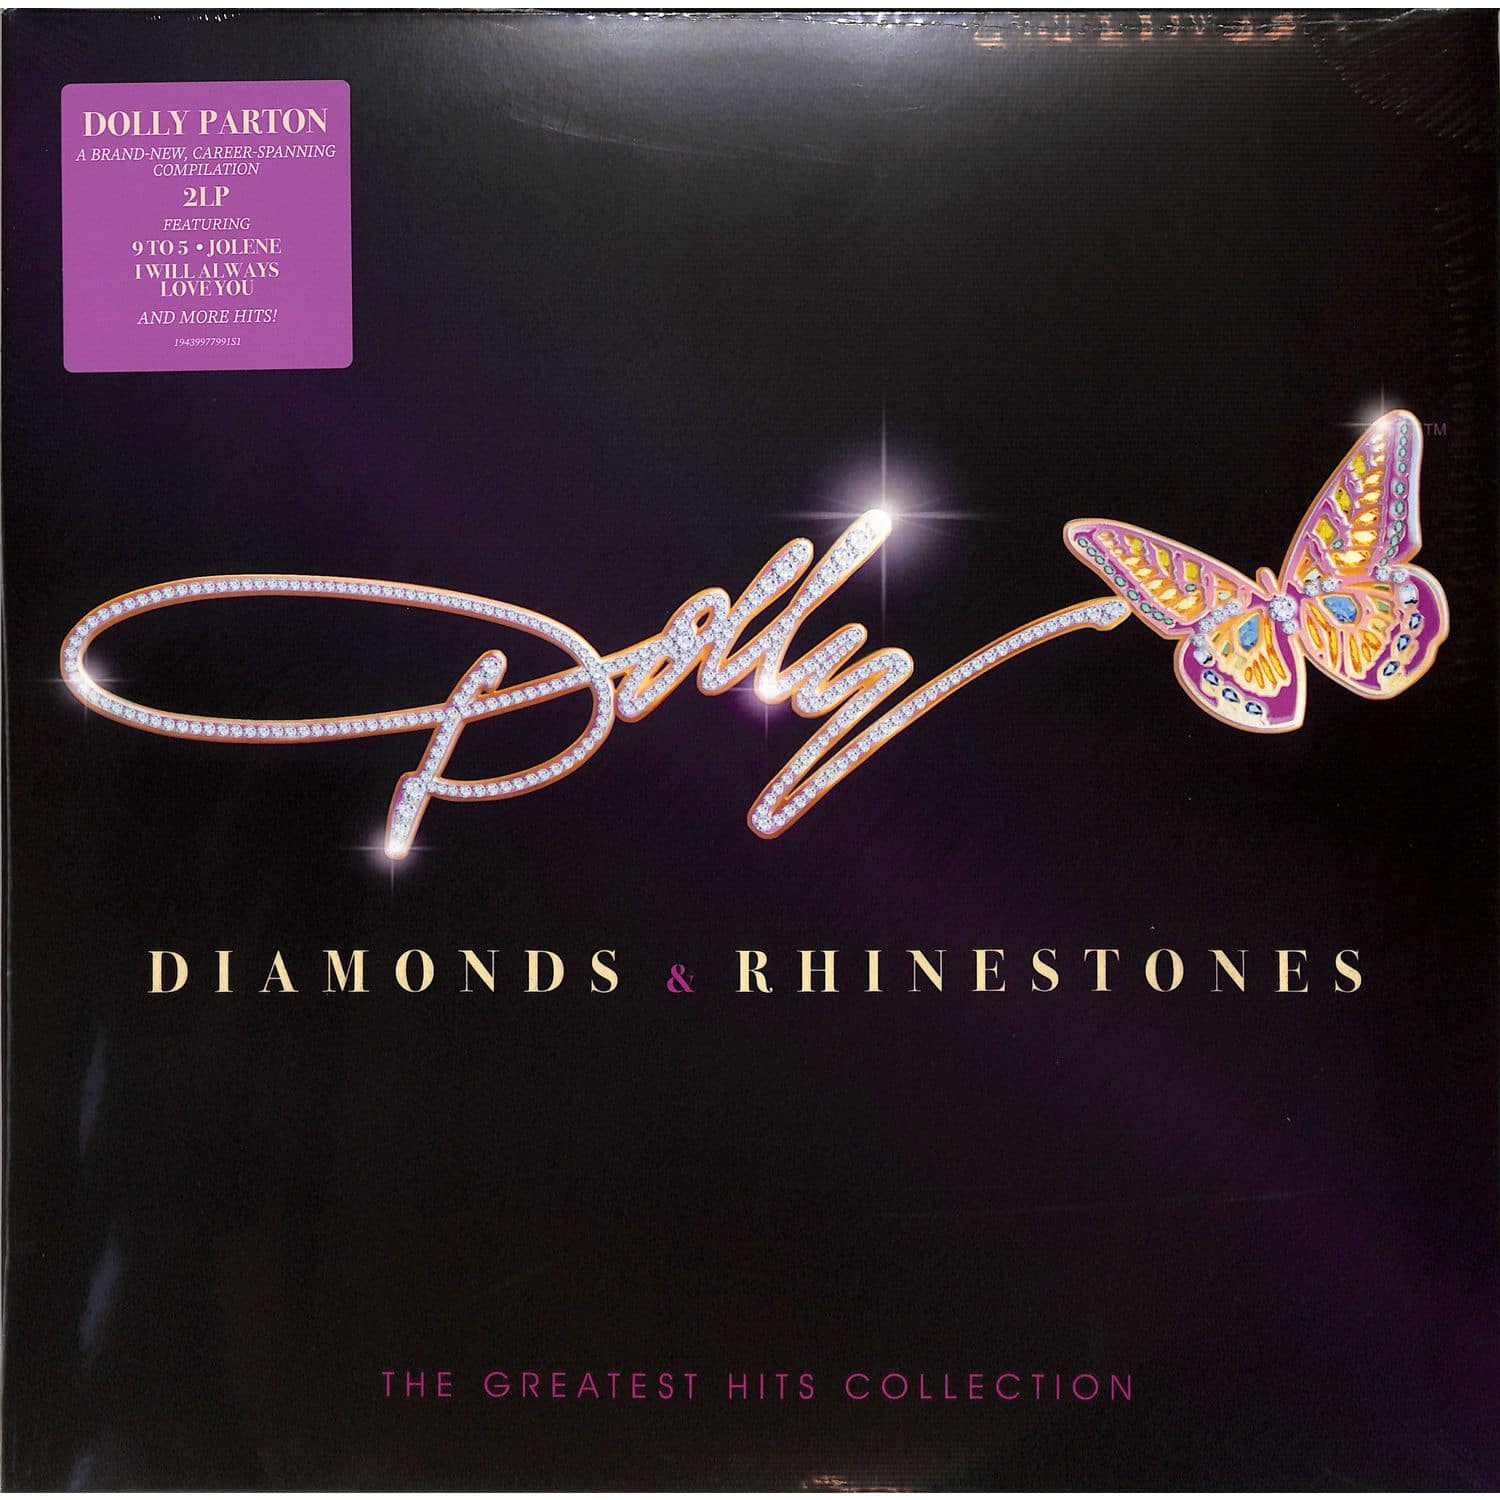 Dolly Parton - DIAMONDS & RHINESTONES: THE GREATEST HITS COLLECTION 